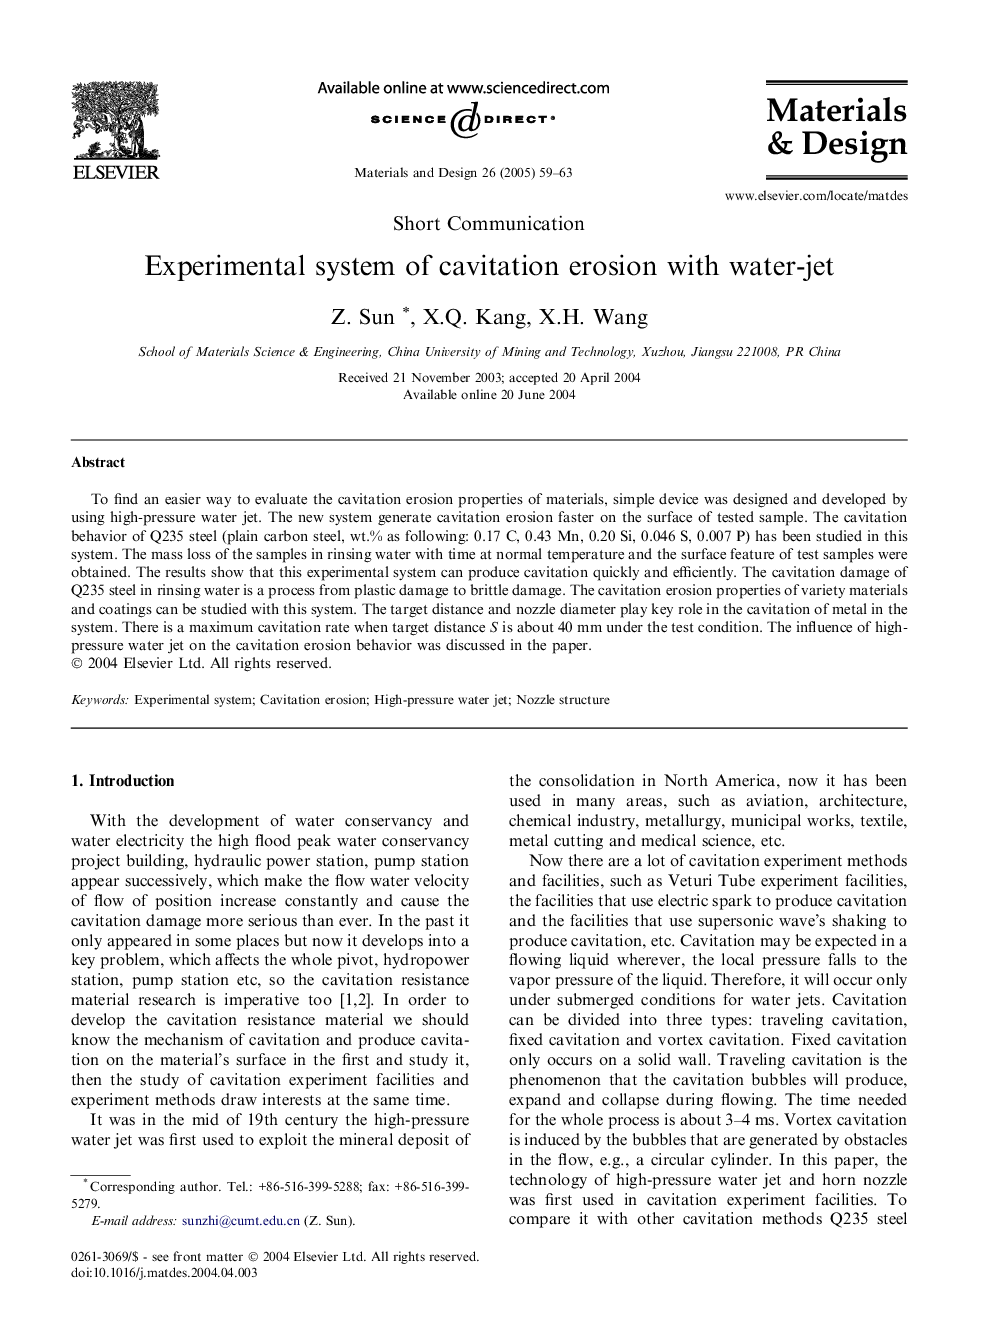 Experimental system of cavitation erosion with water-jet